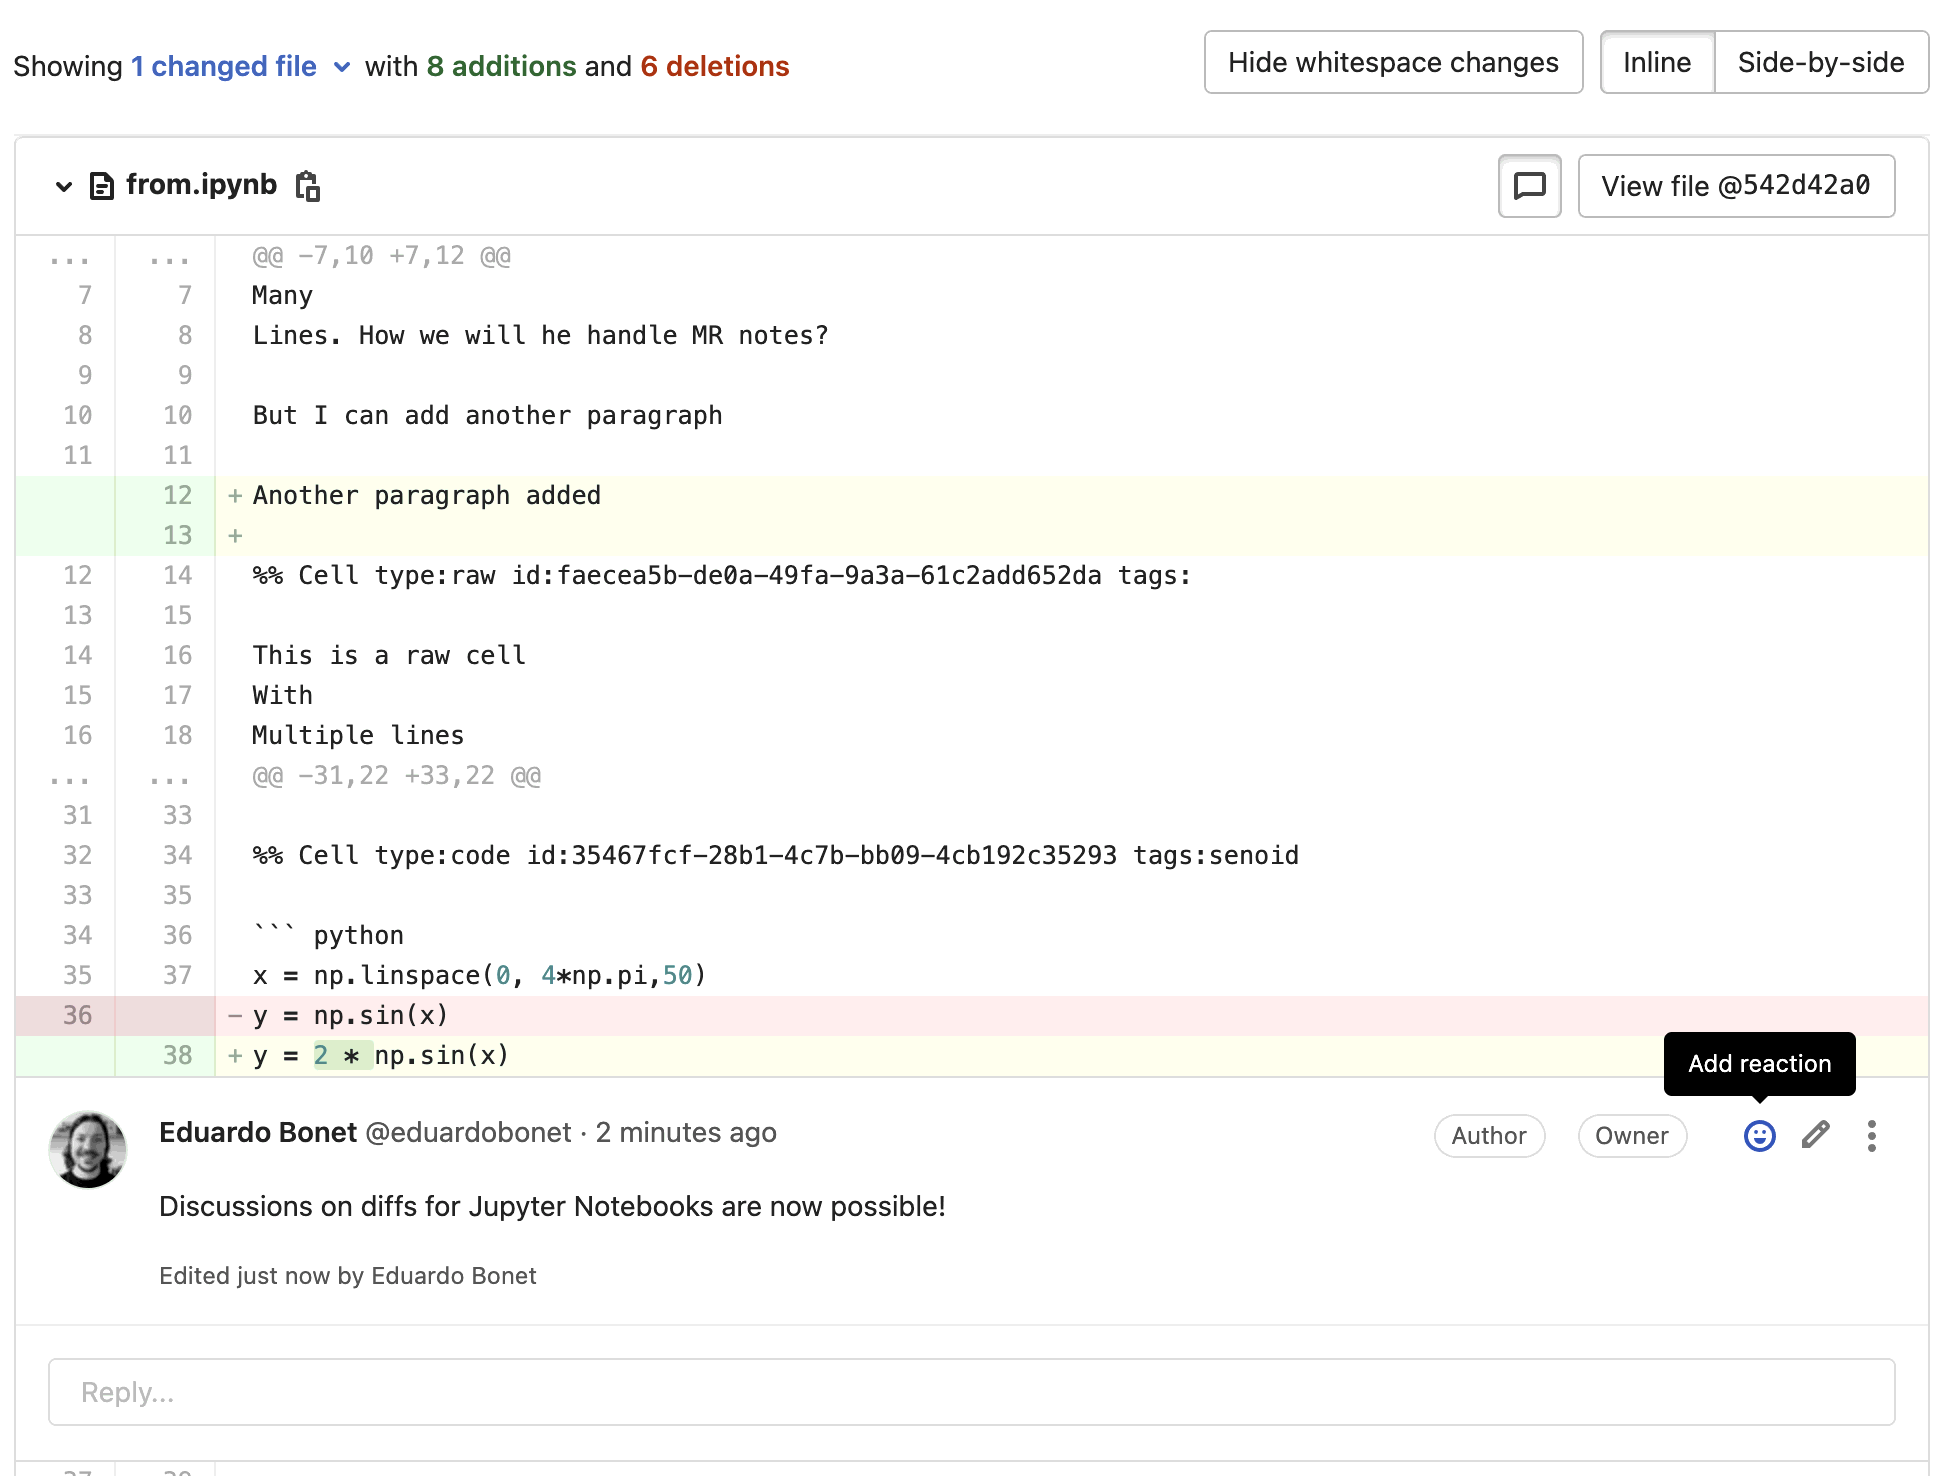 Cleaner diffs for Jupyter Notebook files